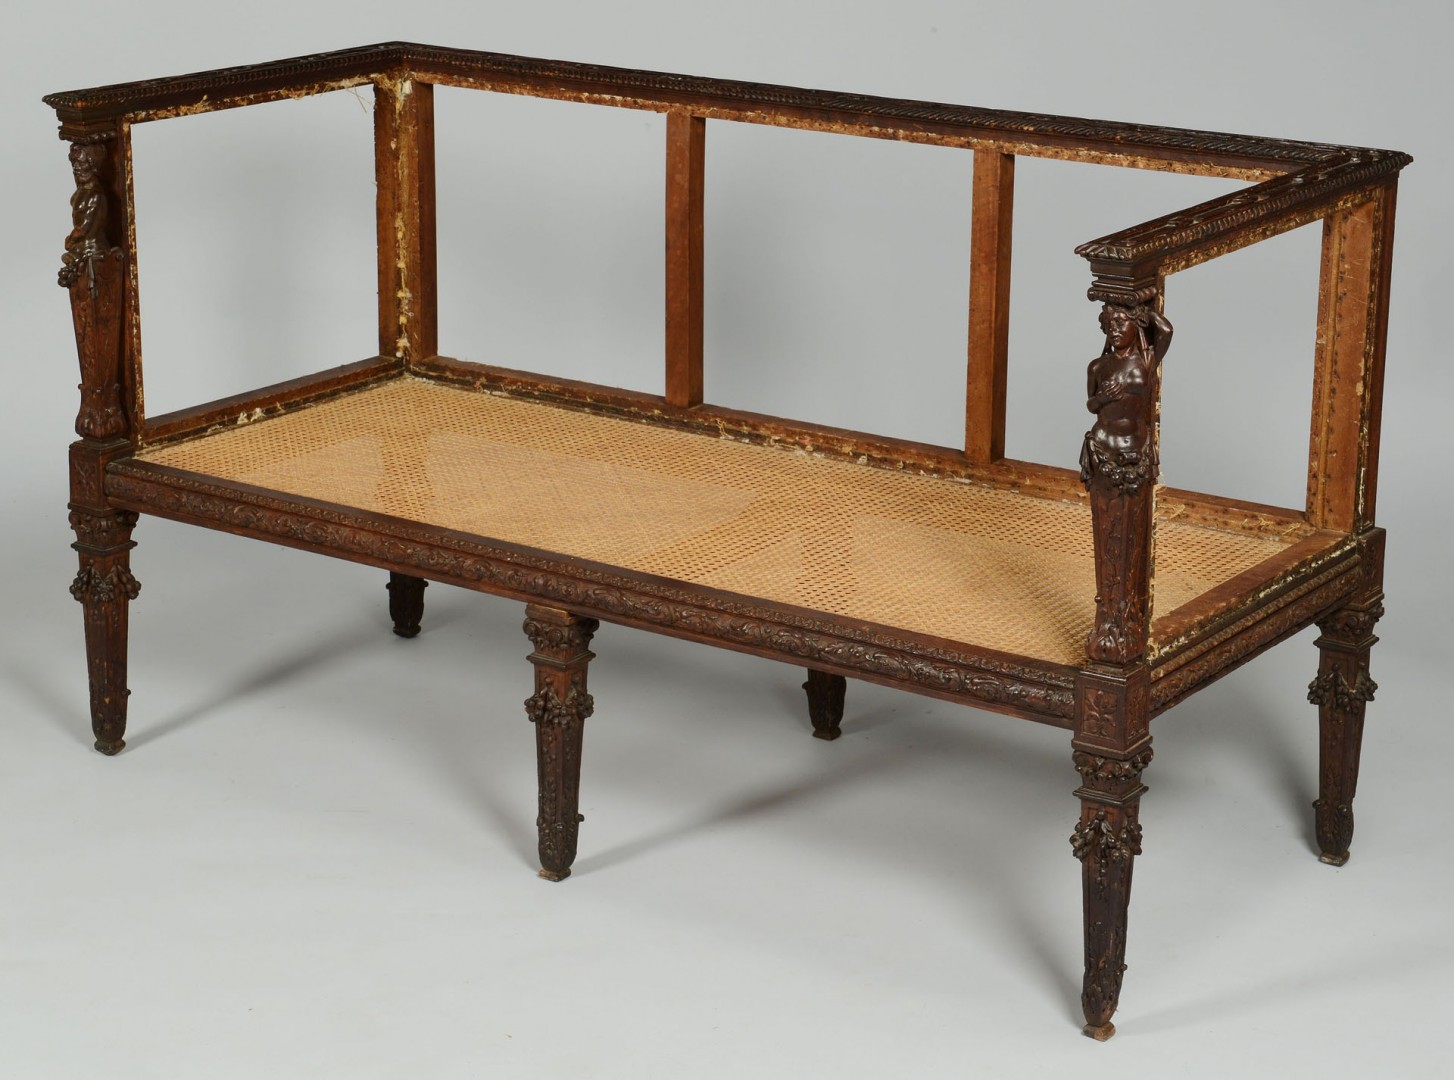 Lot 348: Carved Renaissance Style Settee & 15th C. Fabric